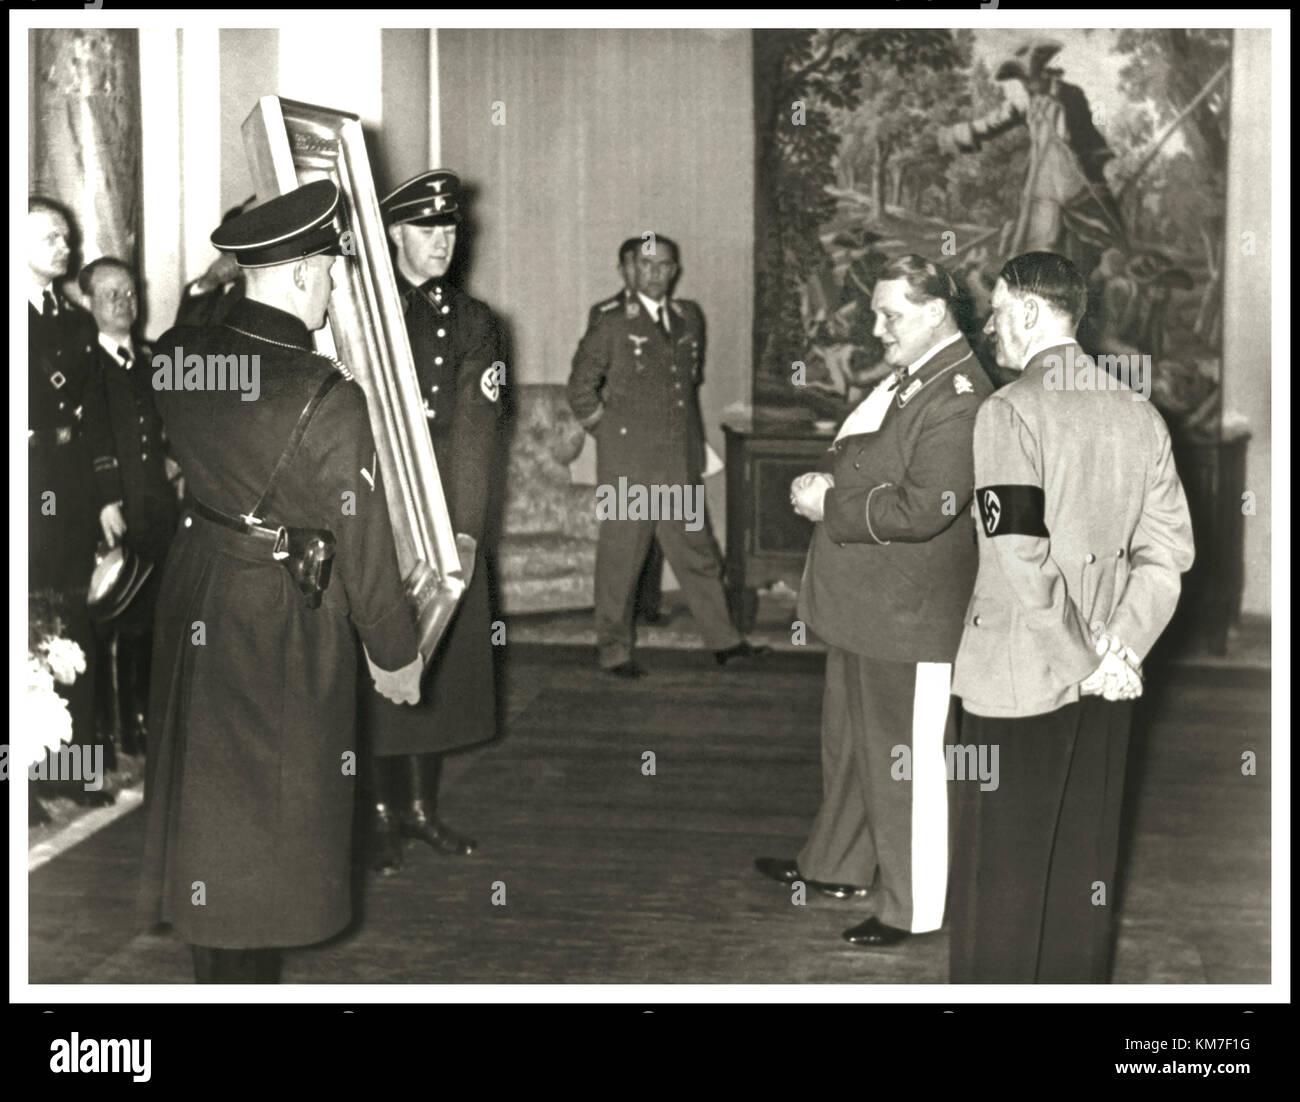 VINTAGE NAZI GOERING BIRTHDAY HITLER German Field-Marshal Hermann Goering presented with a painting named ''The Falconer' on his 45th birthday given to him by by Adolf Hitler Stock Photo